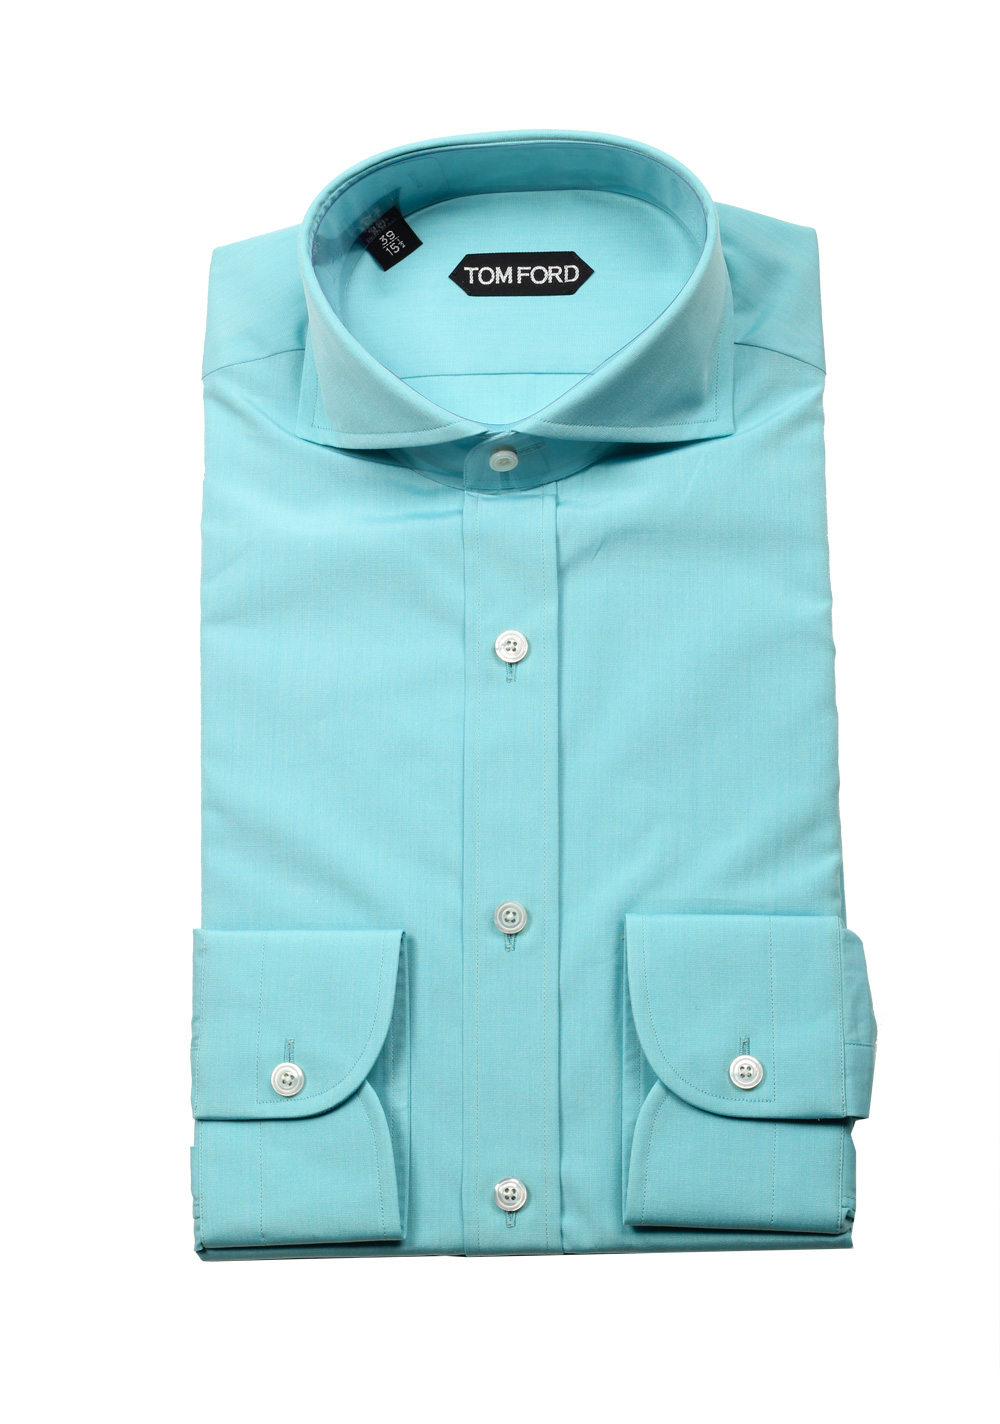 TOM FORD Solid Turquoise Dress Shirt Size 39 / 15,5 U.S. | Costume Limité